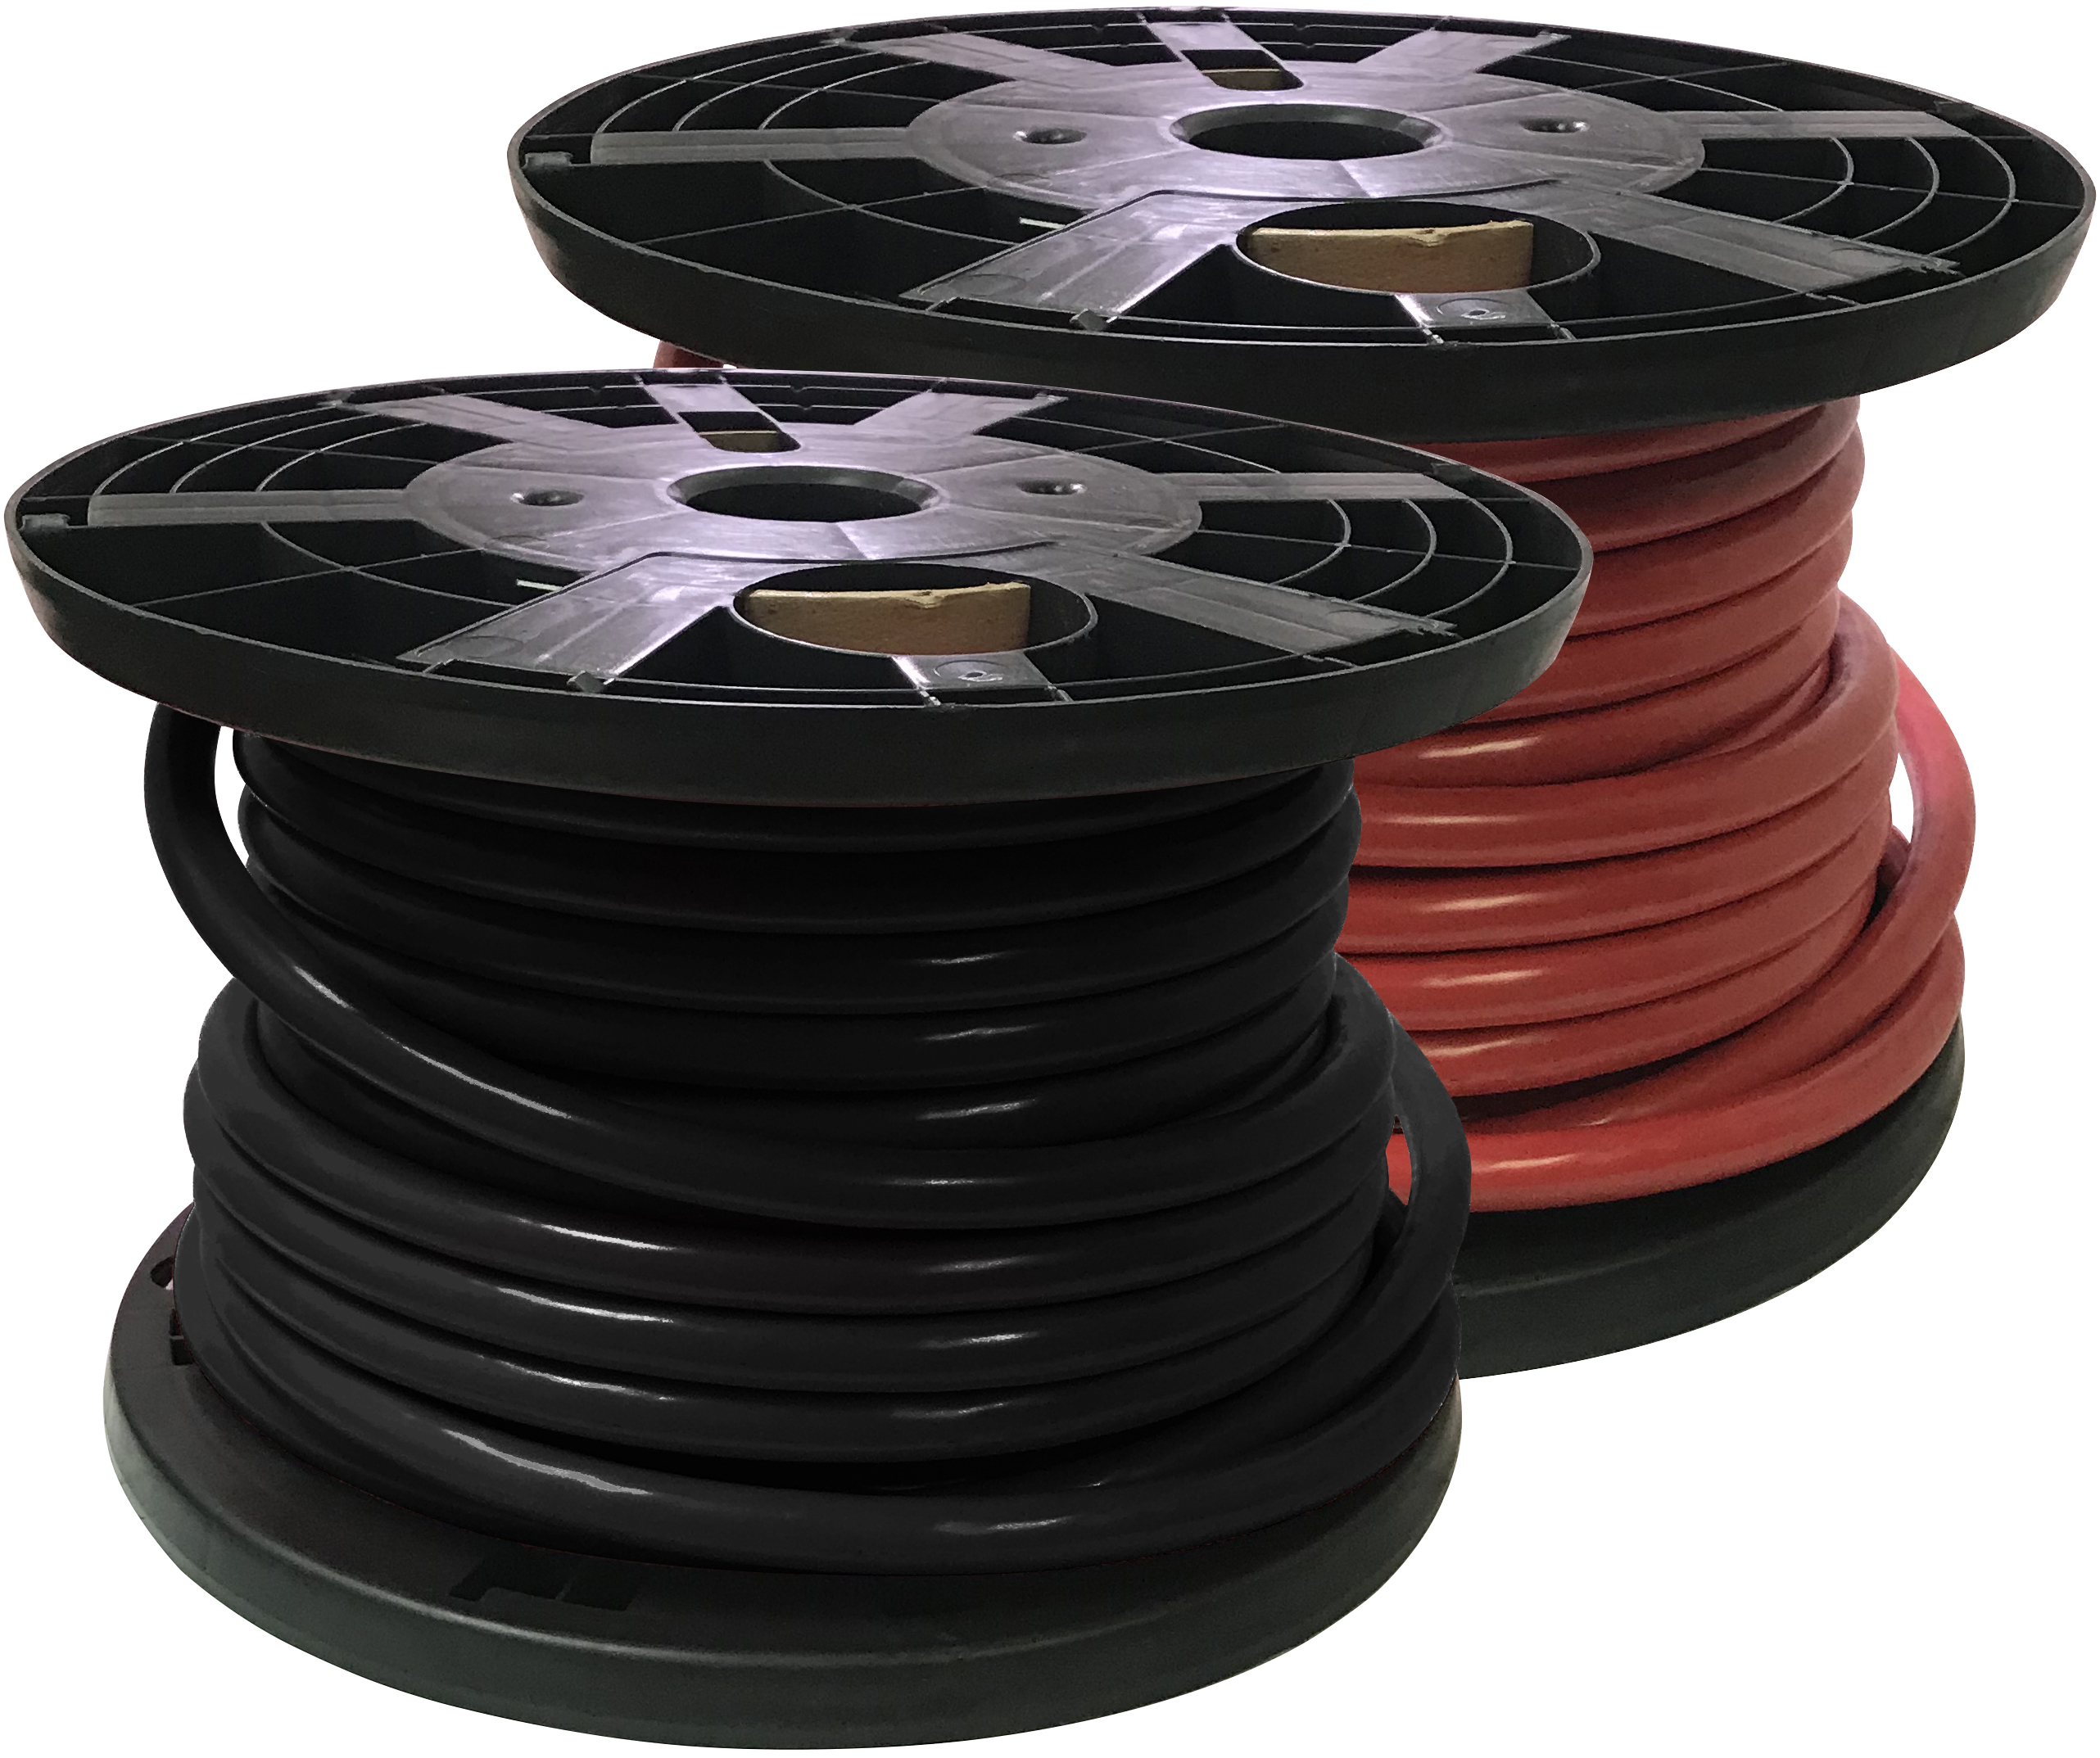 CABLE COLOR :BLACKBattery Cable Pure Copper Power Wire 3/0 or 4/0 Gauge AWG Made in USA SAE J1127 WIRE AWG SIZE :0000 GAUGE 4/0 AWG LENGTH :14 FOOT 